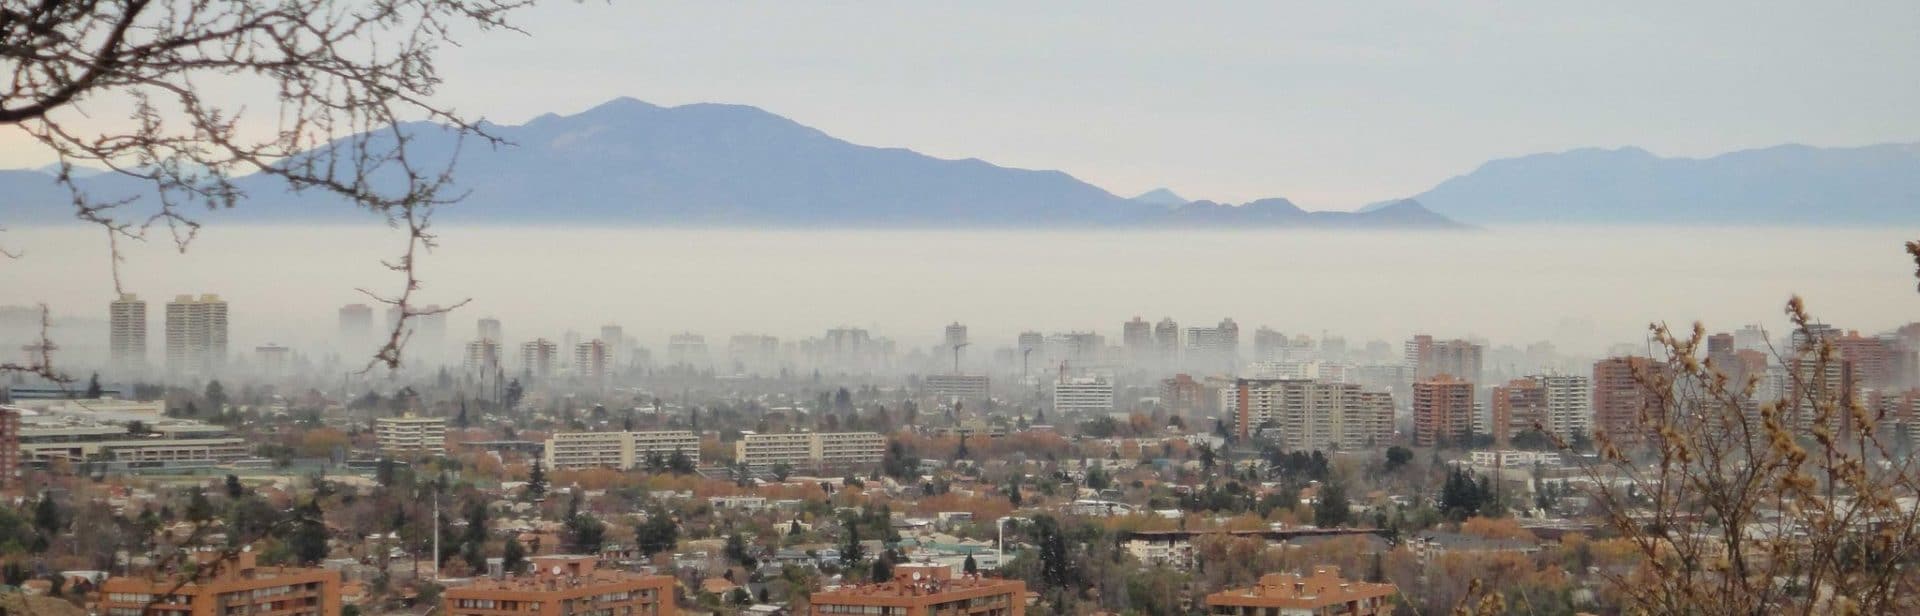 smog over city with mountains in background